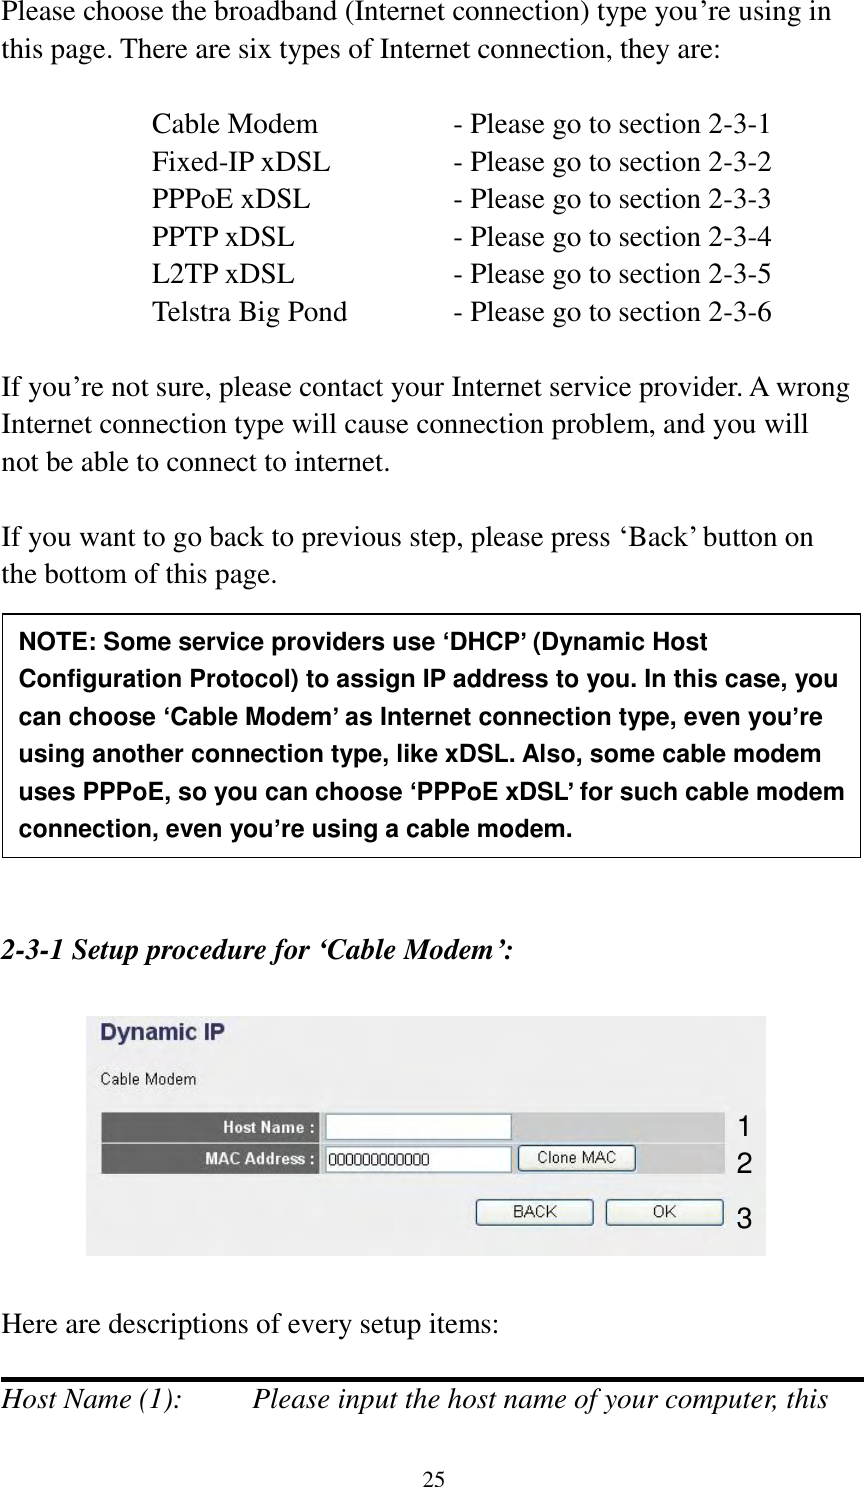 25 Please choose the broadband (Internet connection) type you‟re using in this page. There are six types of Internet connection, they are:  Cable Modem      - Please go to section 2-3-1 Fixed-IP xDSL      - Please go to section 2-3-2 PPPoE xDSL      - Please go to section 2-3-3 PPTP xDSL       - Please go to section 2-3-4 L2TP xDSL       - Please go to section 2-3-5 Telstra Big Pond     - Please go to section 2-3-6  If you‟re not sure, please contact your Internet service provider. A wrong Internet connection type will cause connection problem, and you will not be able to connect to internet.  If you want to go back to previous step, please press „Back‟ button on the bottom of this page.          2-3-1 Setup procedure for ‘Cable Modem’:    Here are descriptions of every setup items:  Host Name (1):    Please input the host name of your computer, this NOTE: Some service providers use ‘DHCP’ (Dynamic Host Configuration Protocol) to assign IP address to you. In this case, you can choose ‘Cable Modem’ as Internet connection type, even you’re using another connection type, like xDSL. Also, some cable modem uses PPPoE, so you can choose ‘PPPoE xDSL’ for such cable modem connection, even you’re using a cable modem. 1 2 3 